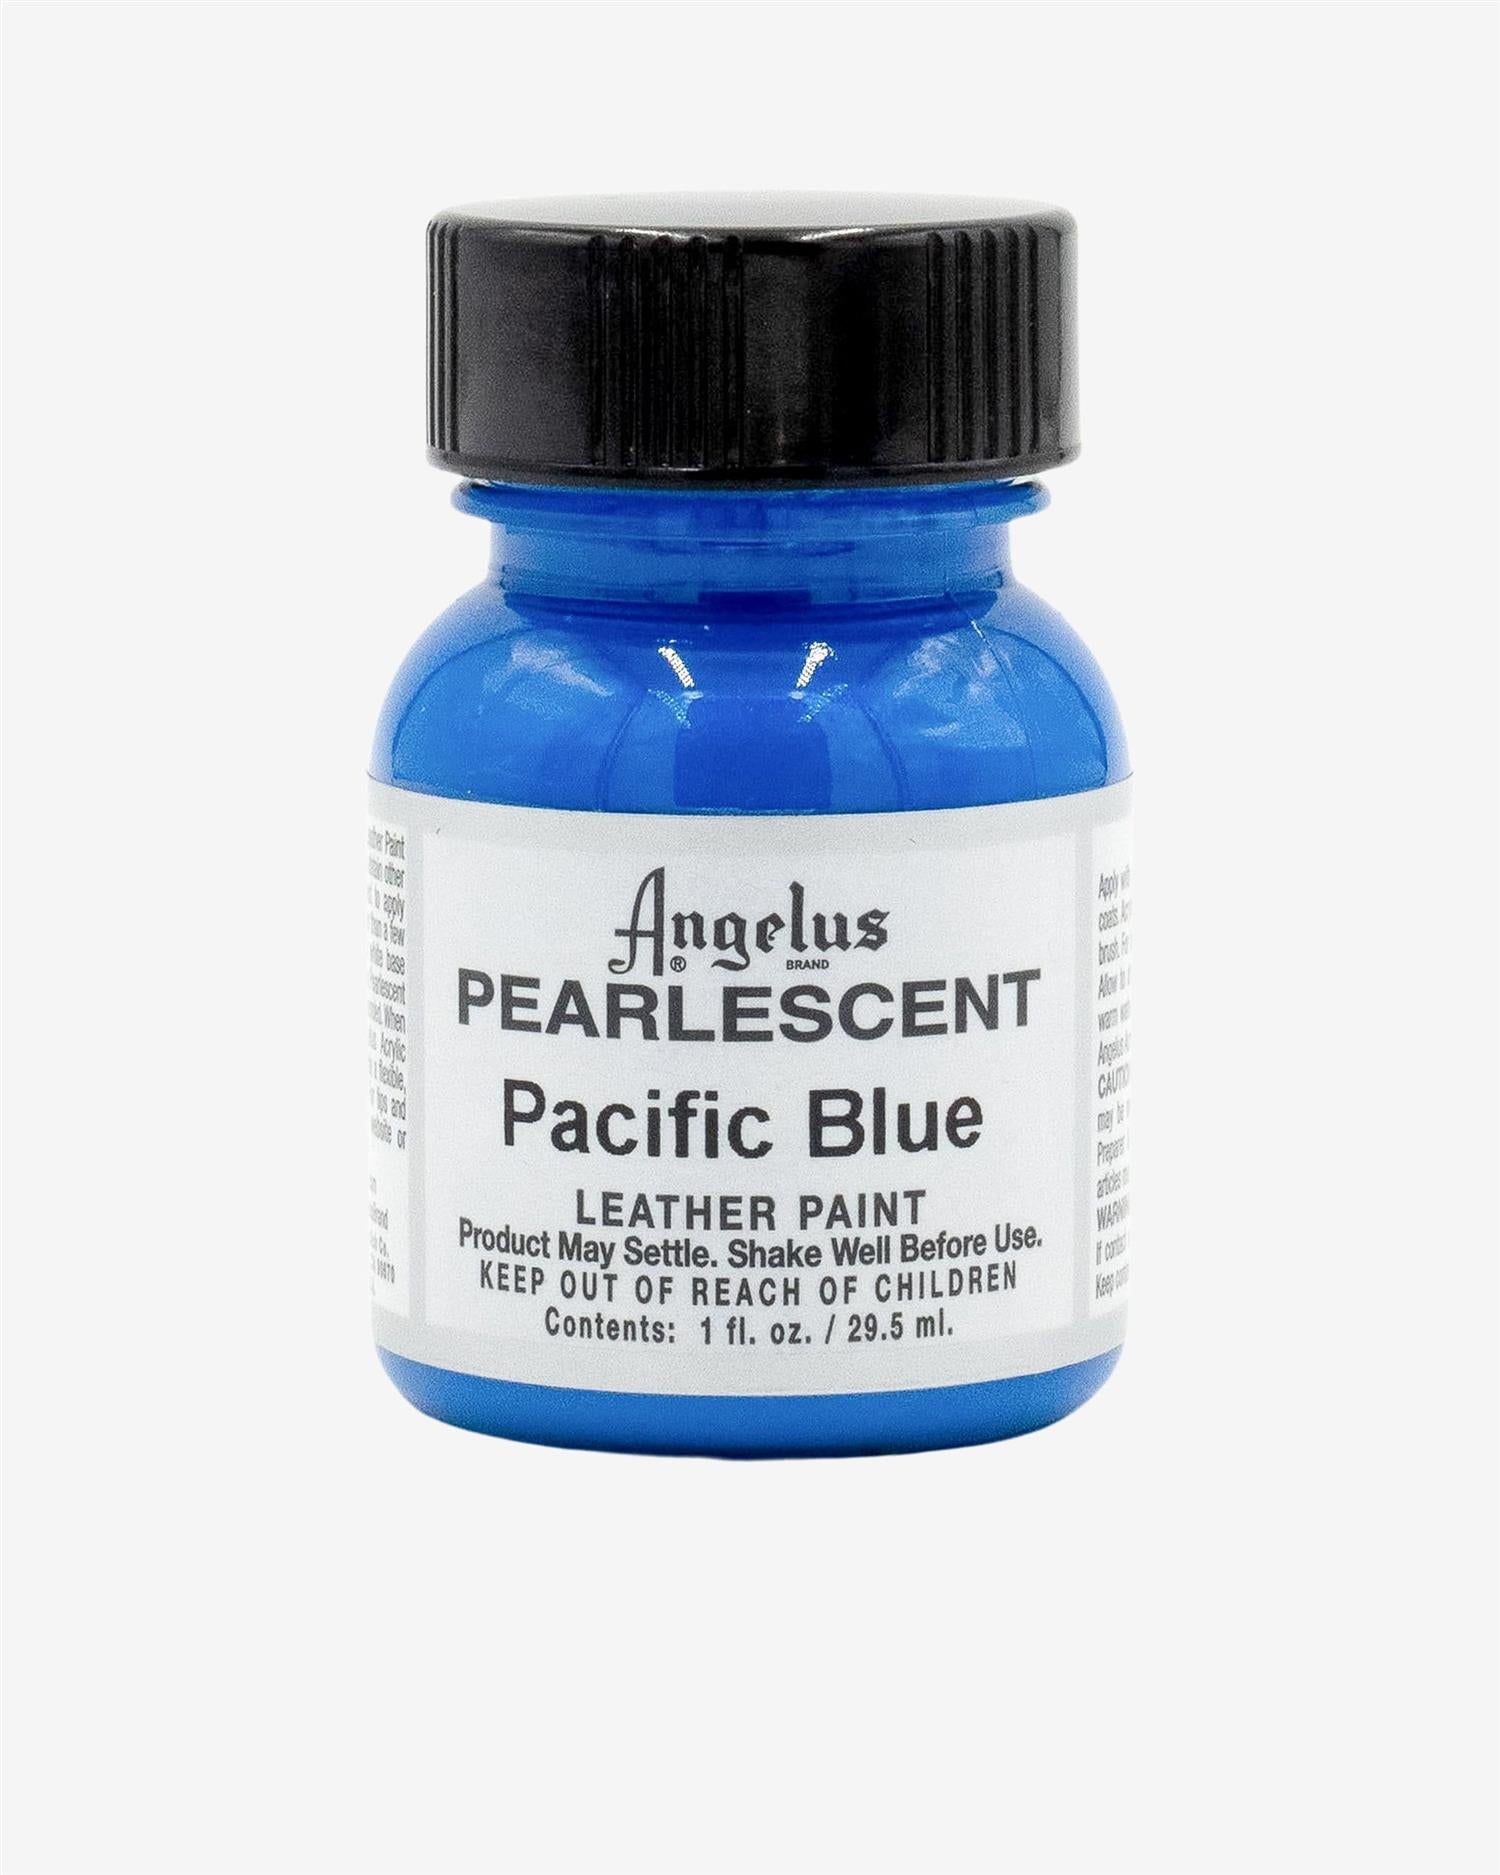 PEARLESCENT LEATHER PAINT - PACIFIC BLUE